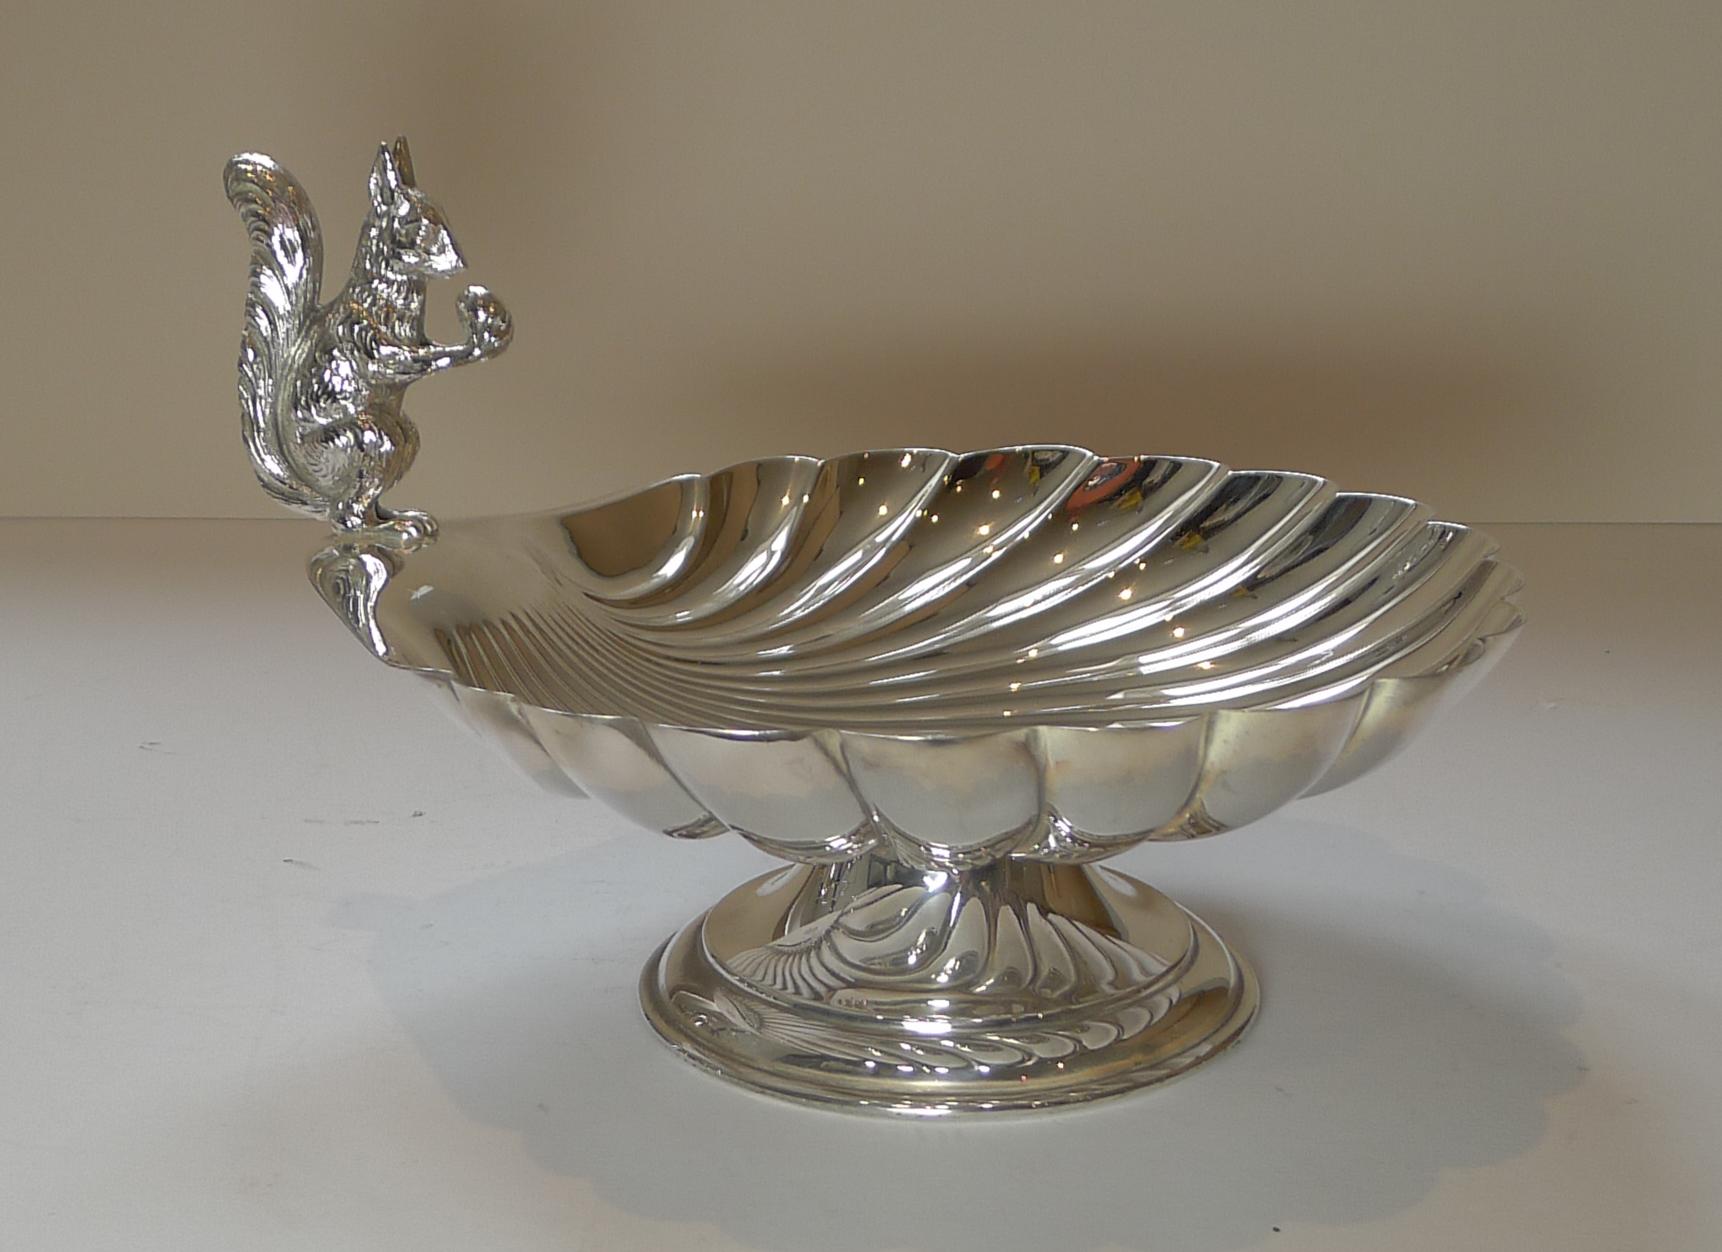 A fabulous and very smart nut dish (it looks great filled with fruit and nuts, even chocolates) featuring a cheeky squirrel munching away.

Just back from our silversmith's workshop where it has been professionally cleaned and polished, restoring